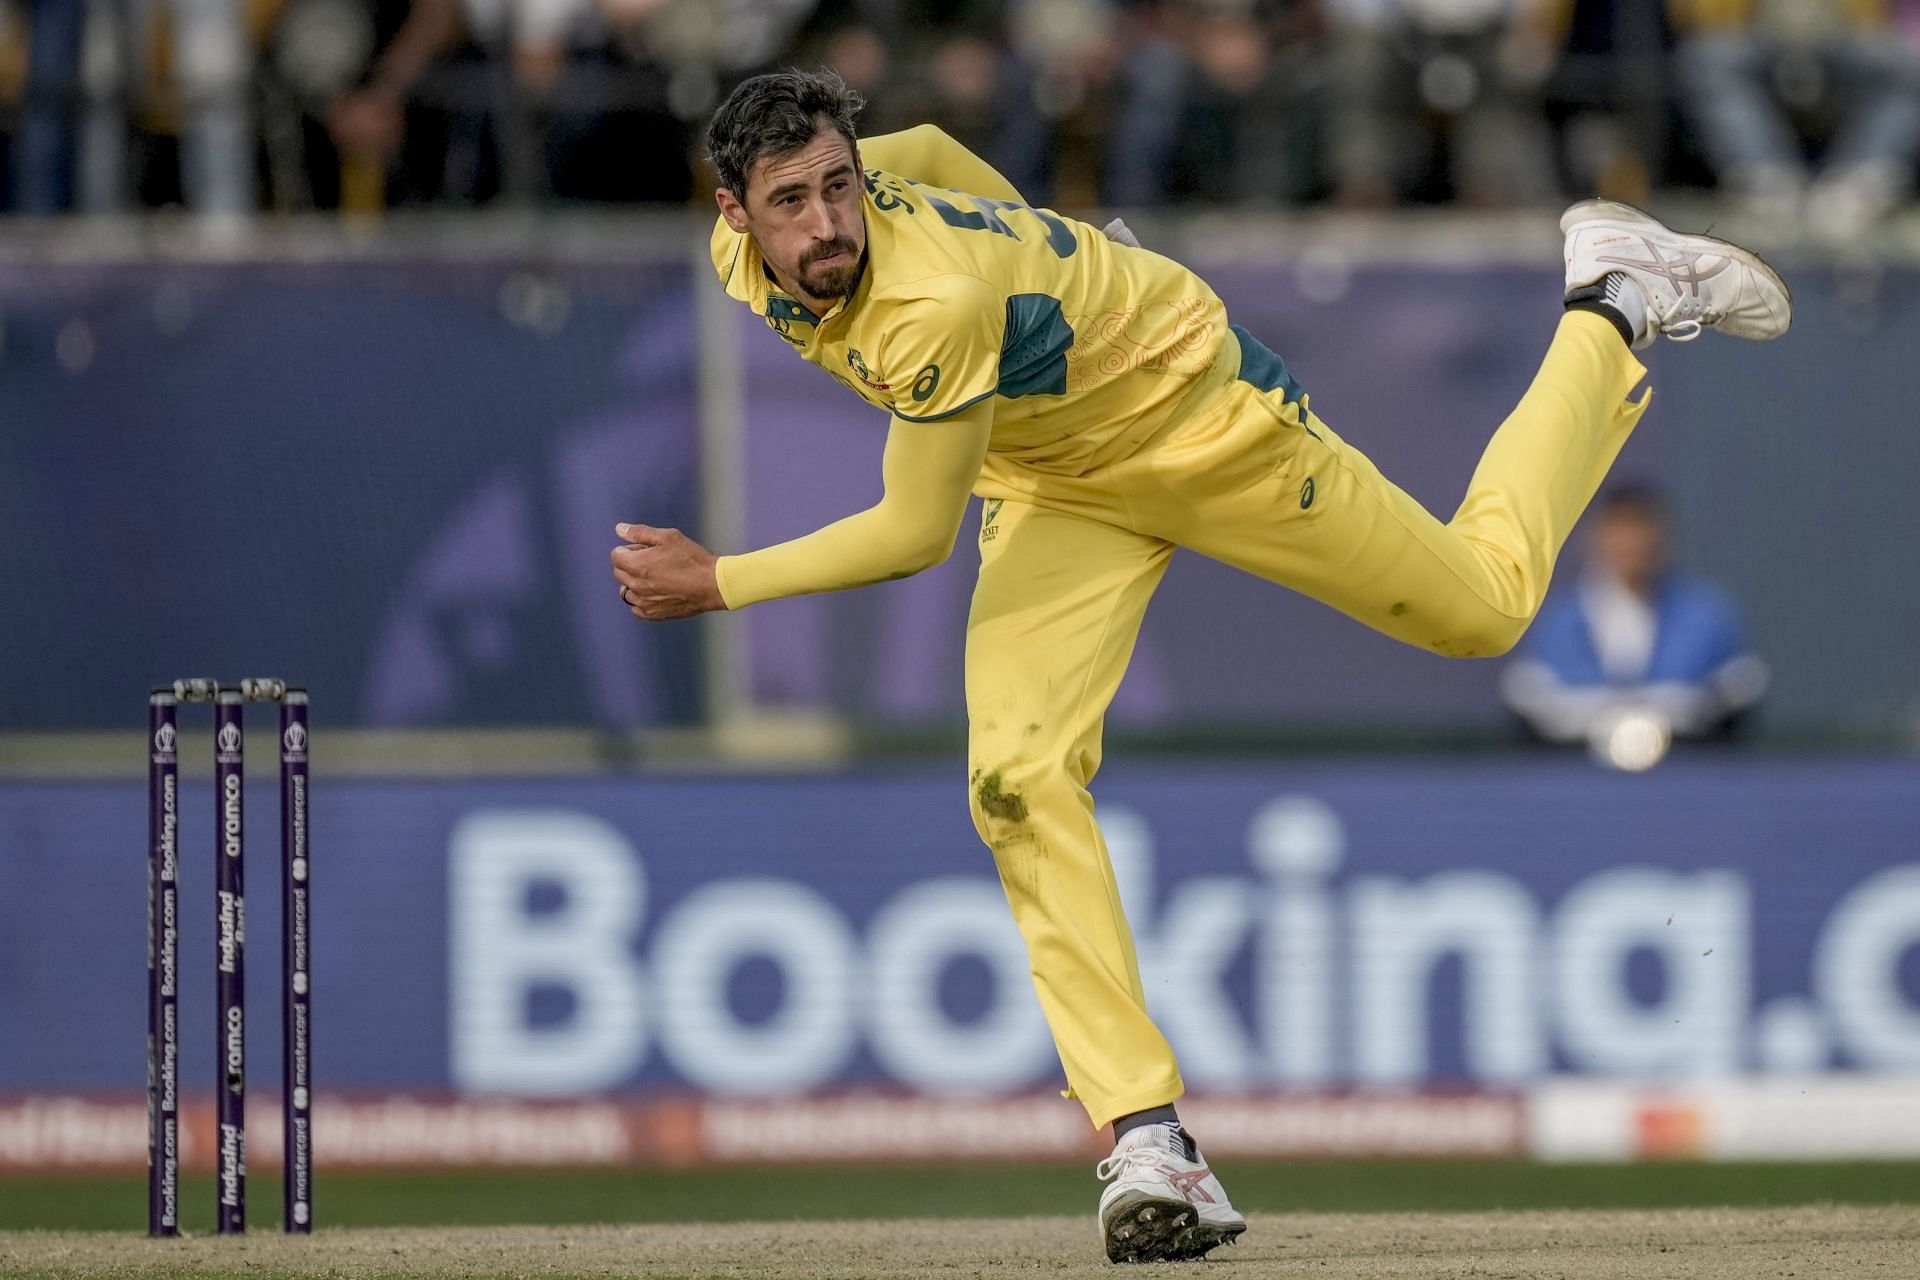 Mitchell Starc opted out of IPL 2018 after being bought by the Kolkata Knight Riders.